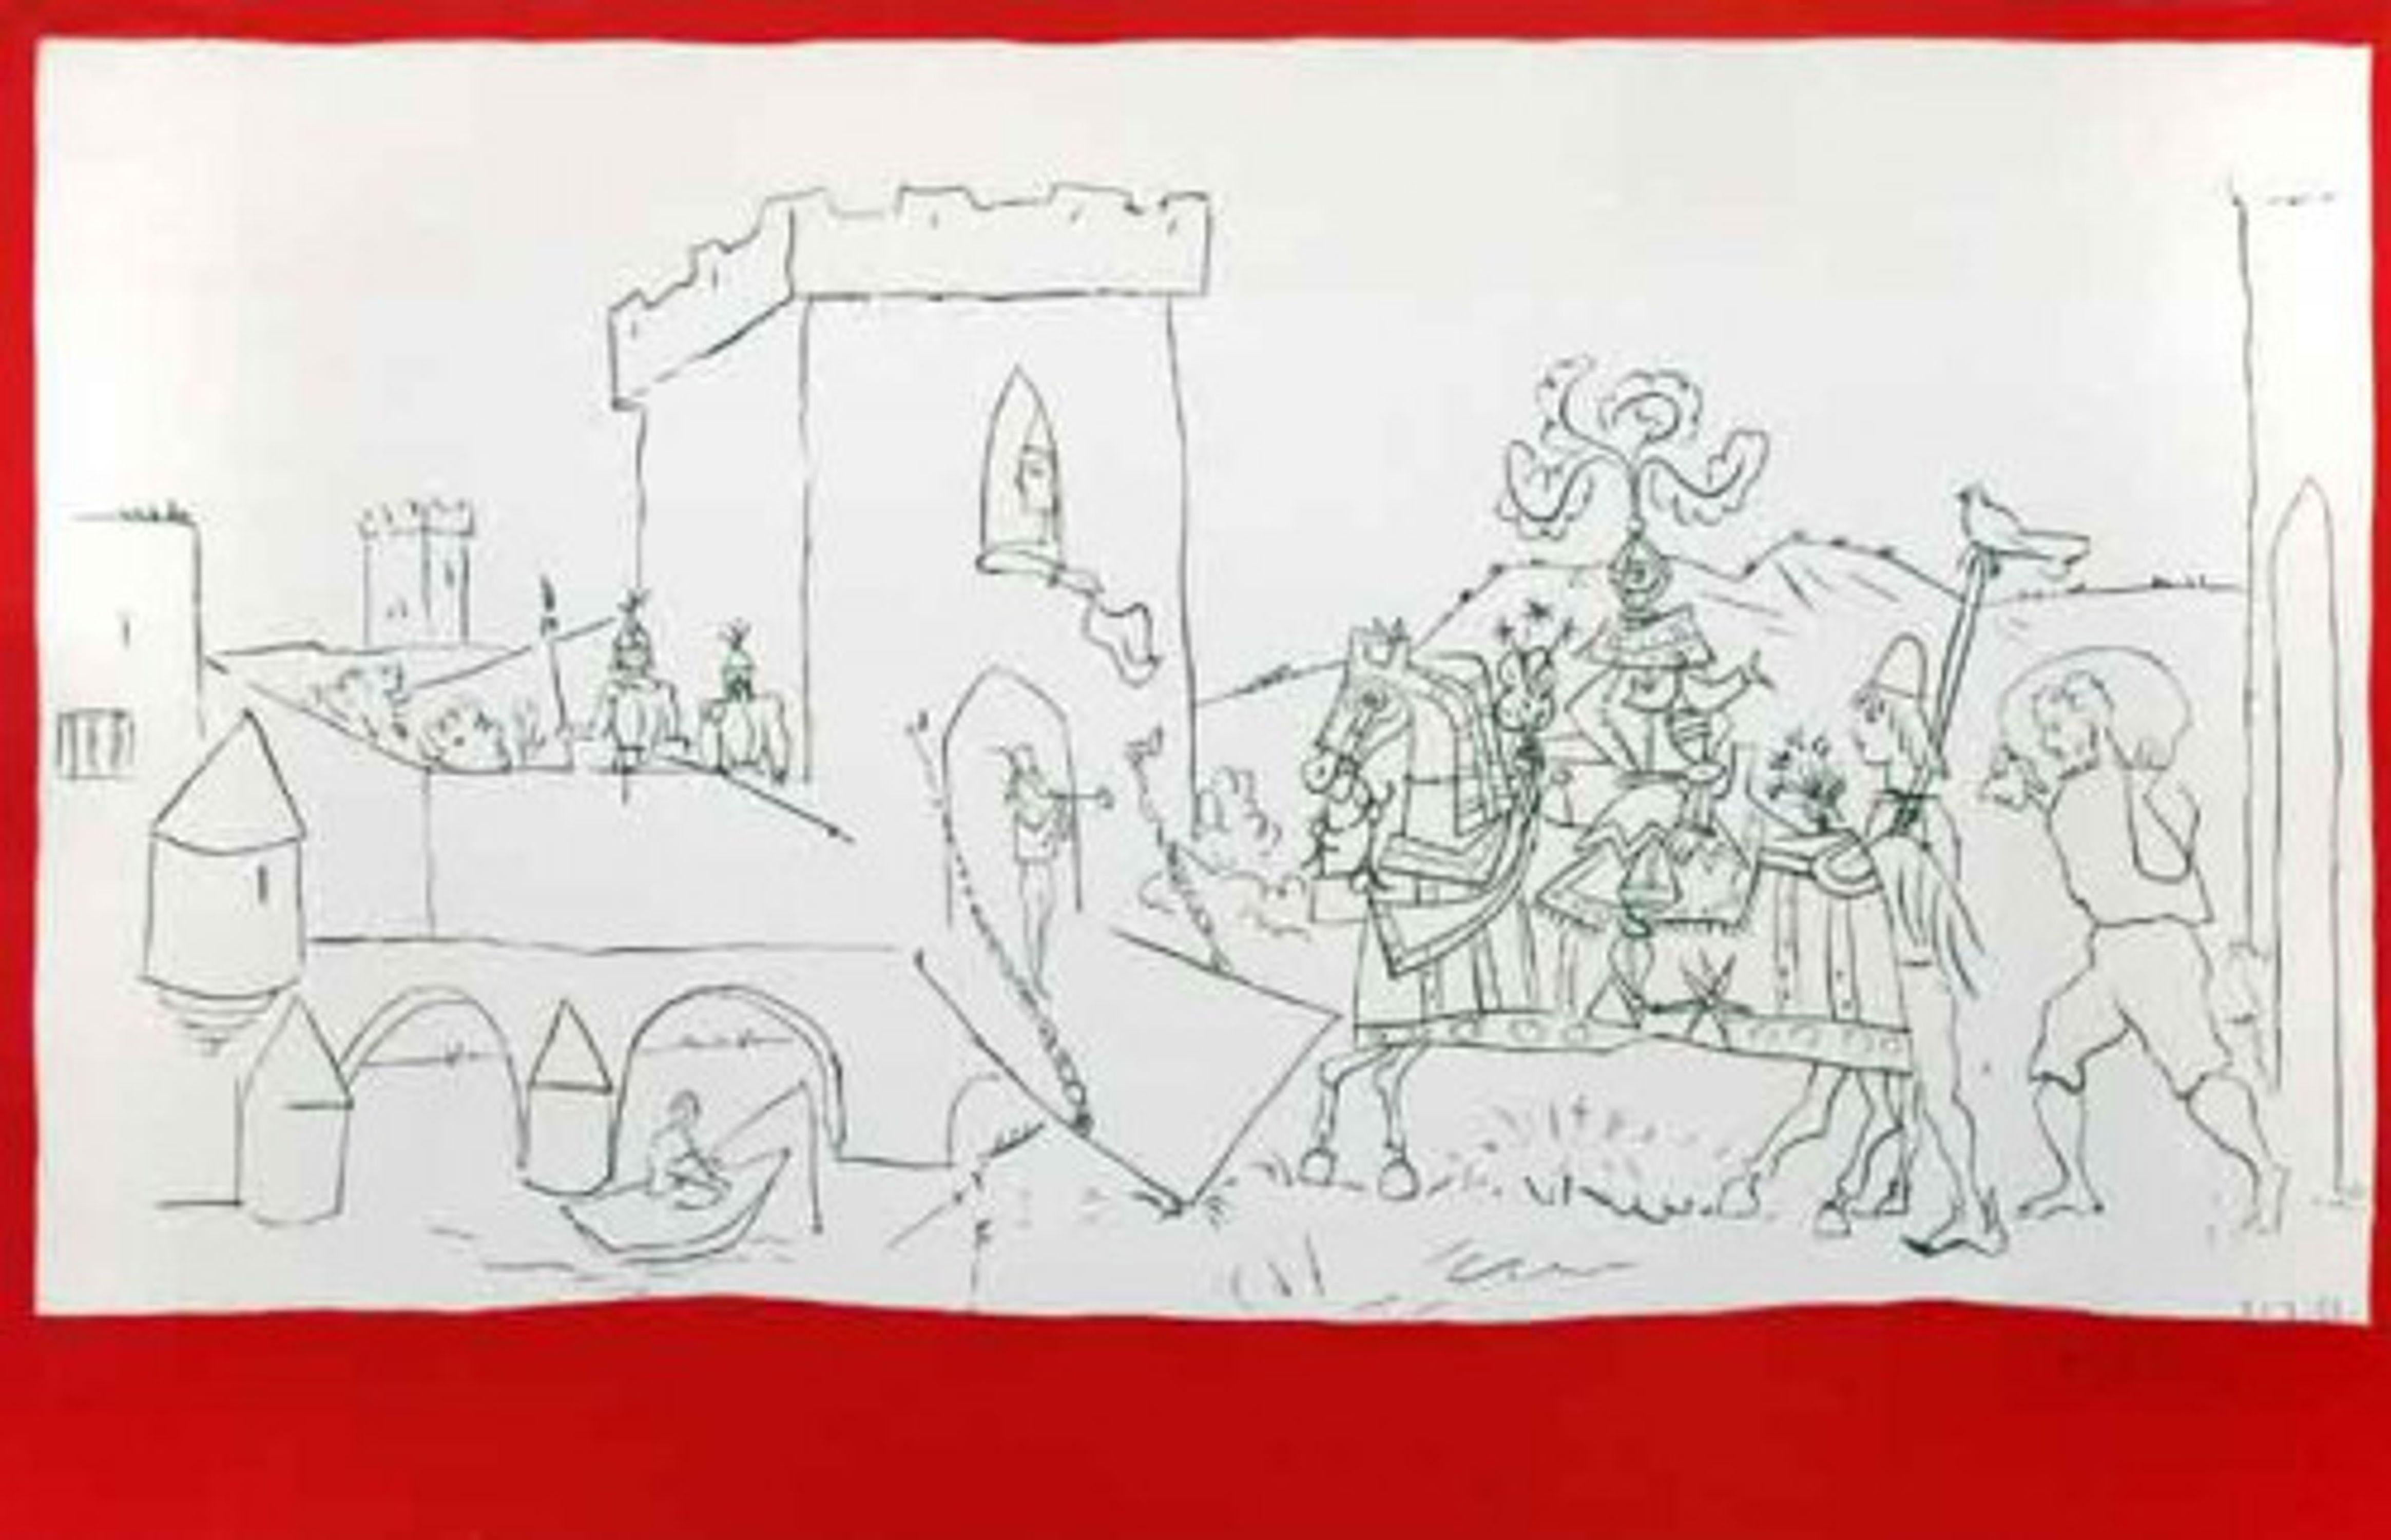 L'Arrivée du Chevalier (The Arrival of the Knight) - Contemporary Print by Pablo Picasso